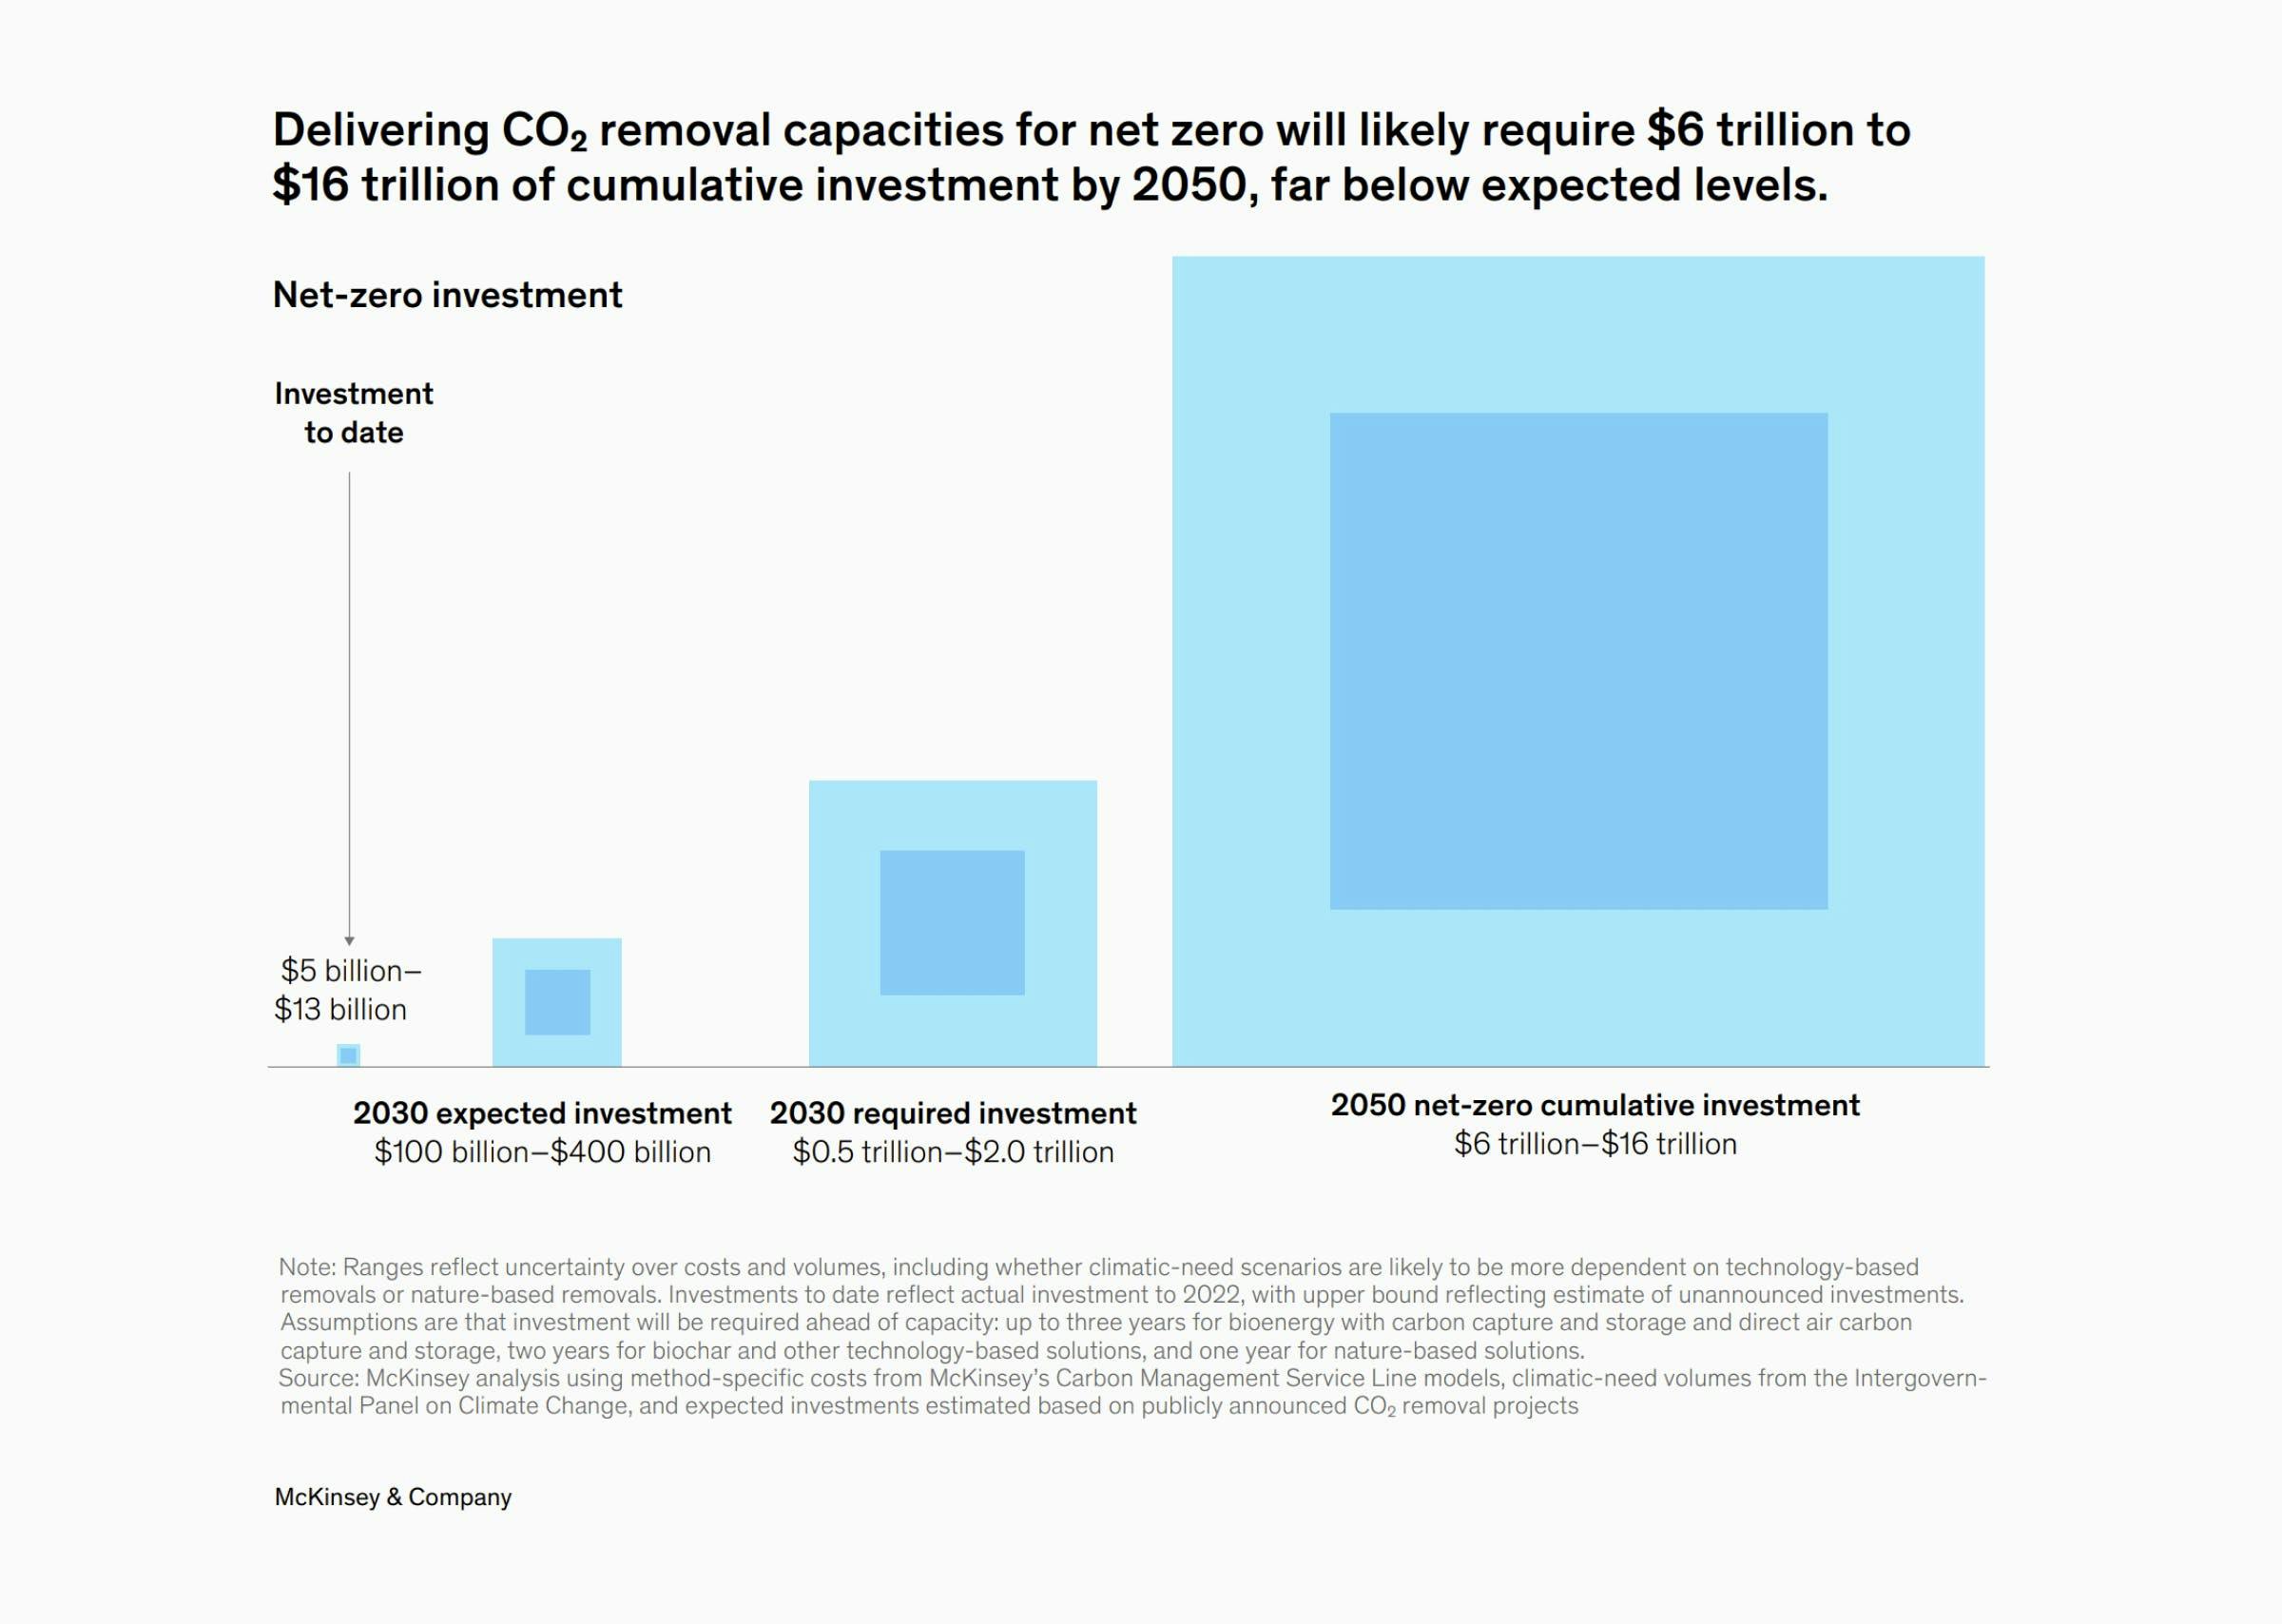 McKinsey: Delivering carbon removal capacities for net zero will likely require $6 trillion to $16 trillion of cumulative investment by 2050